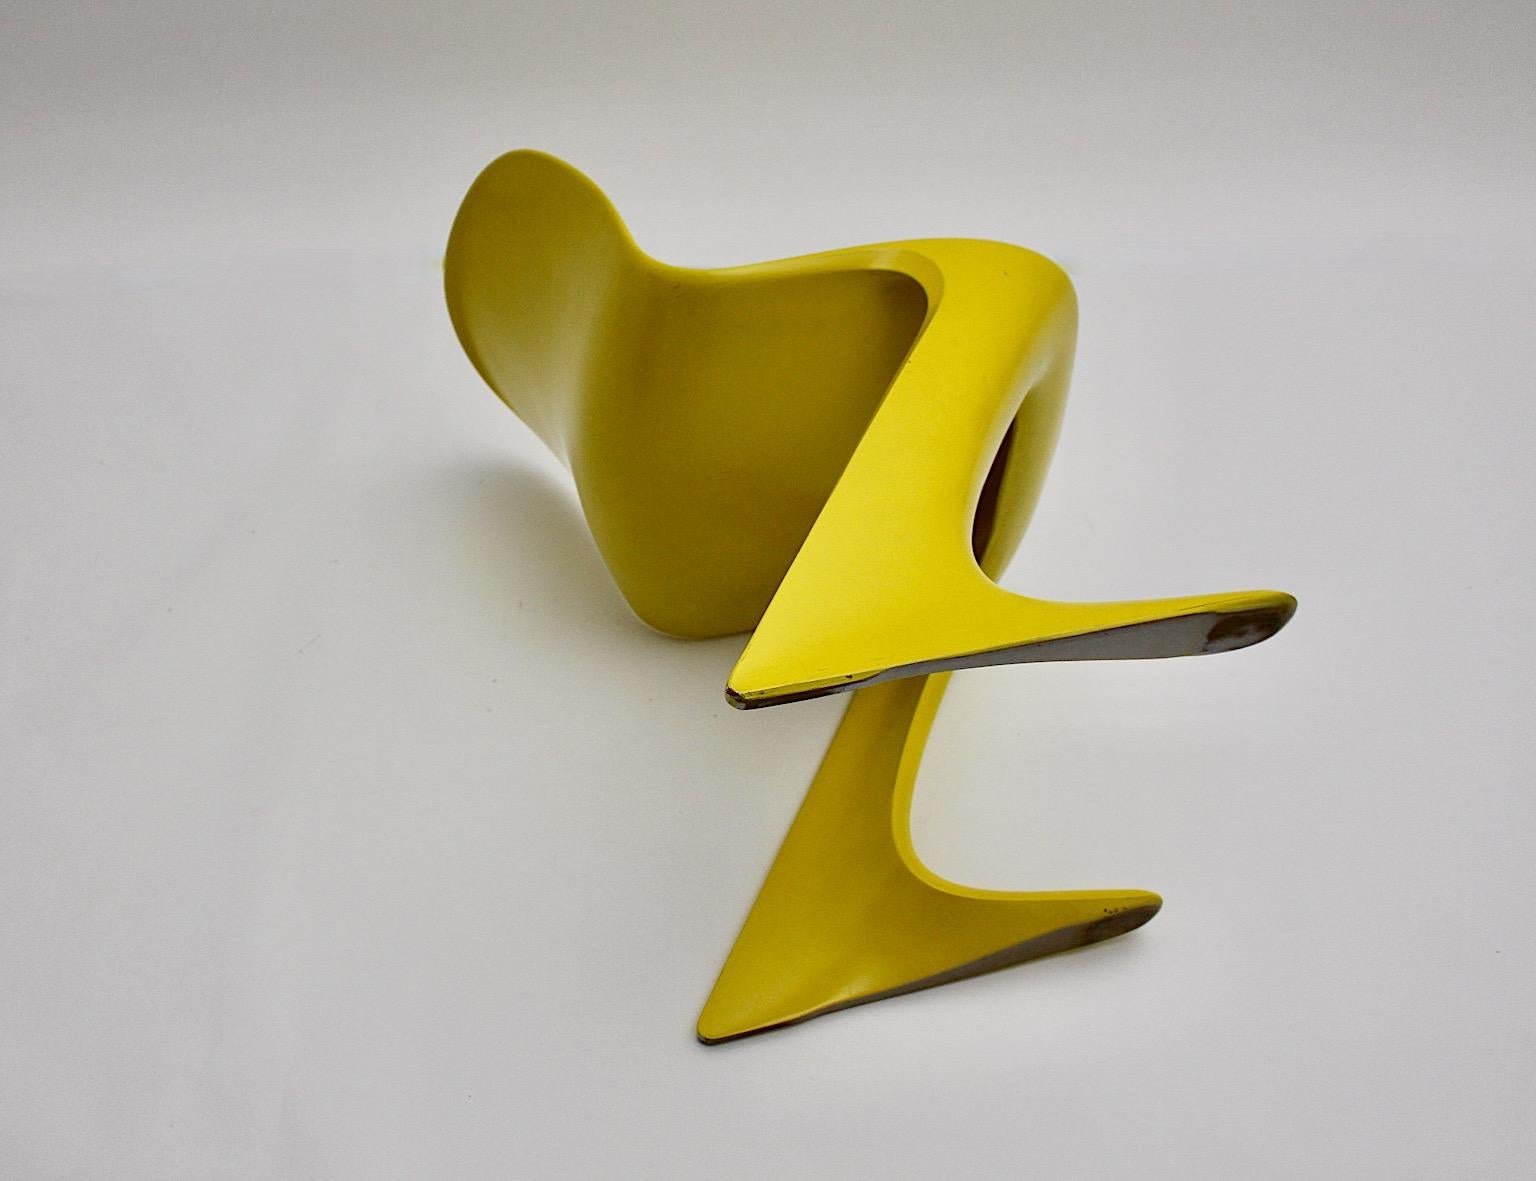 Space Age Vintage Yellow Plastic Chair Kangaroo Chair Ernst Moeckl 1960s Germany For Sale 10